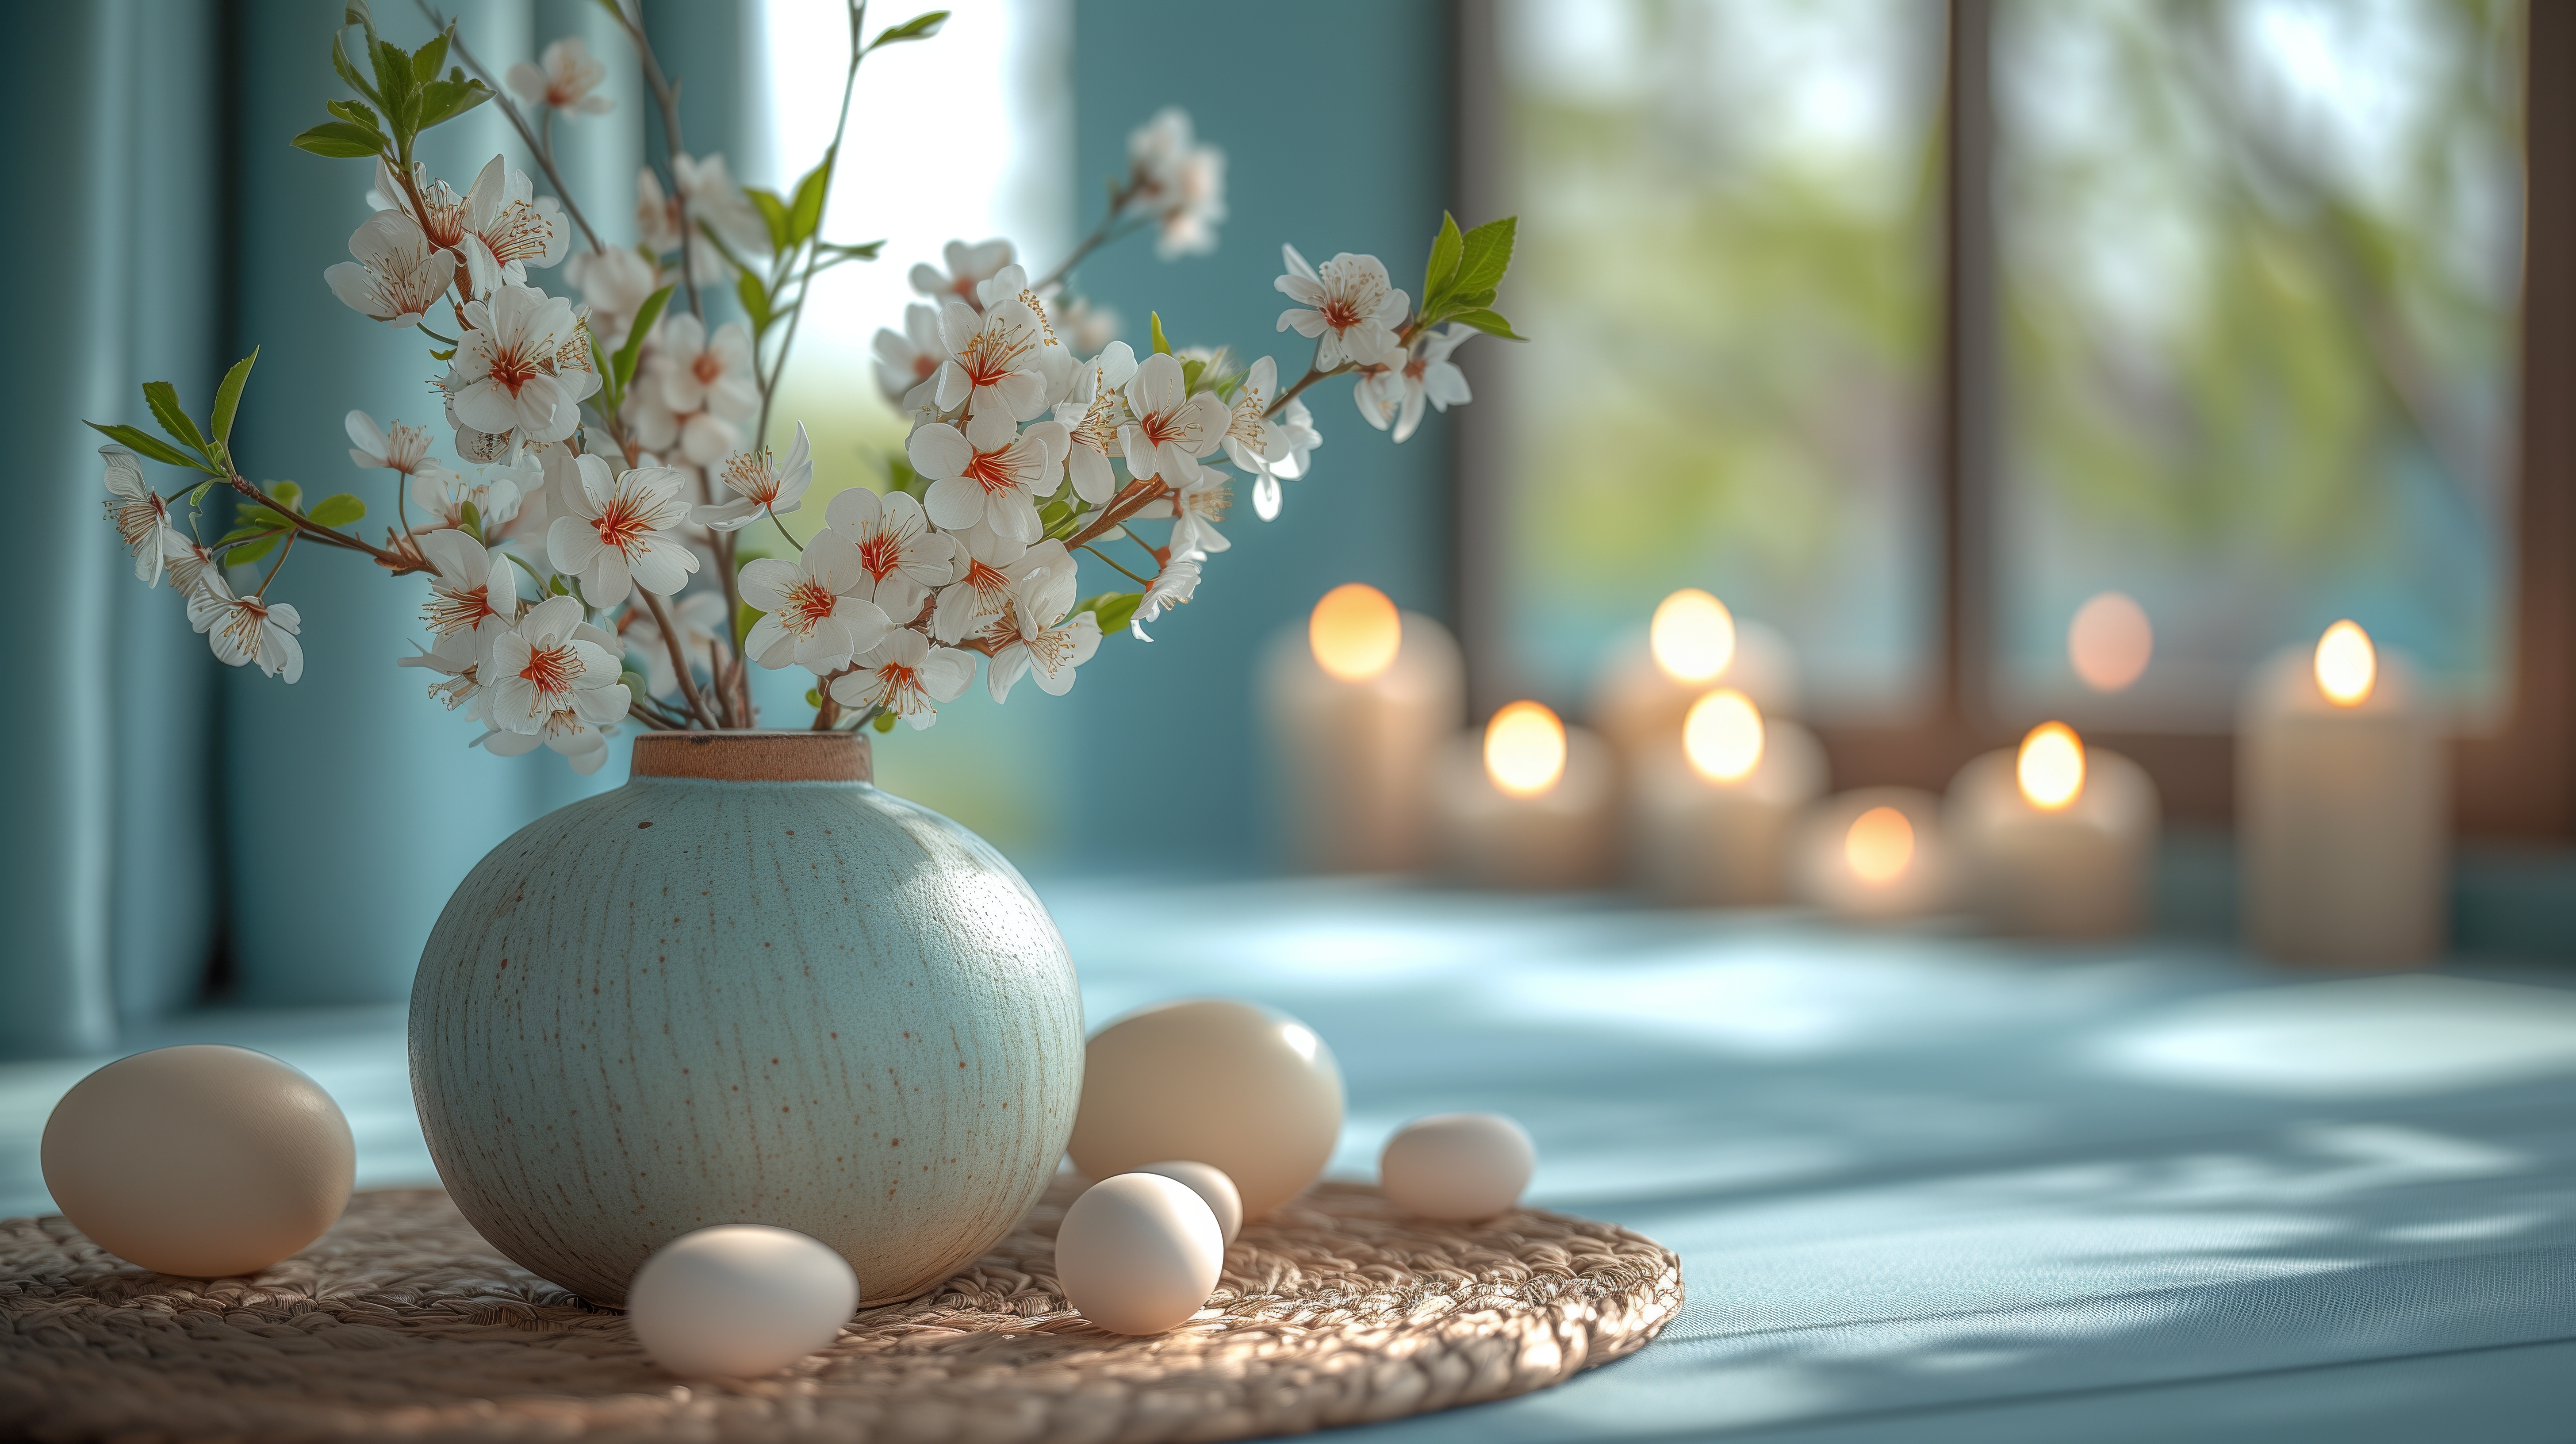 General 5824x3264 AI art flowers vases eggs Easter candles blurred blurry background natural light window fire